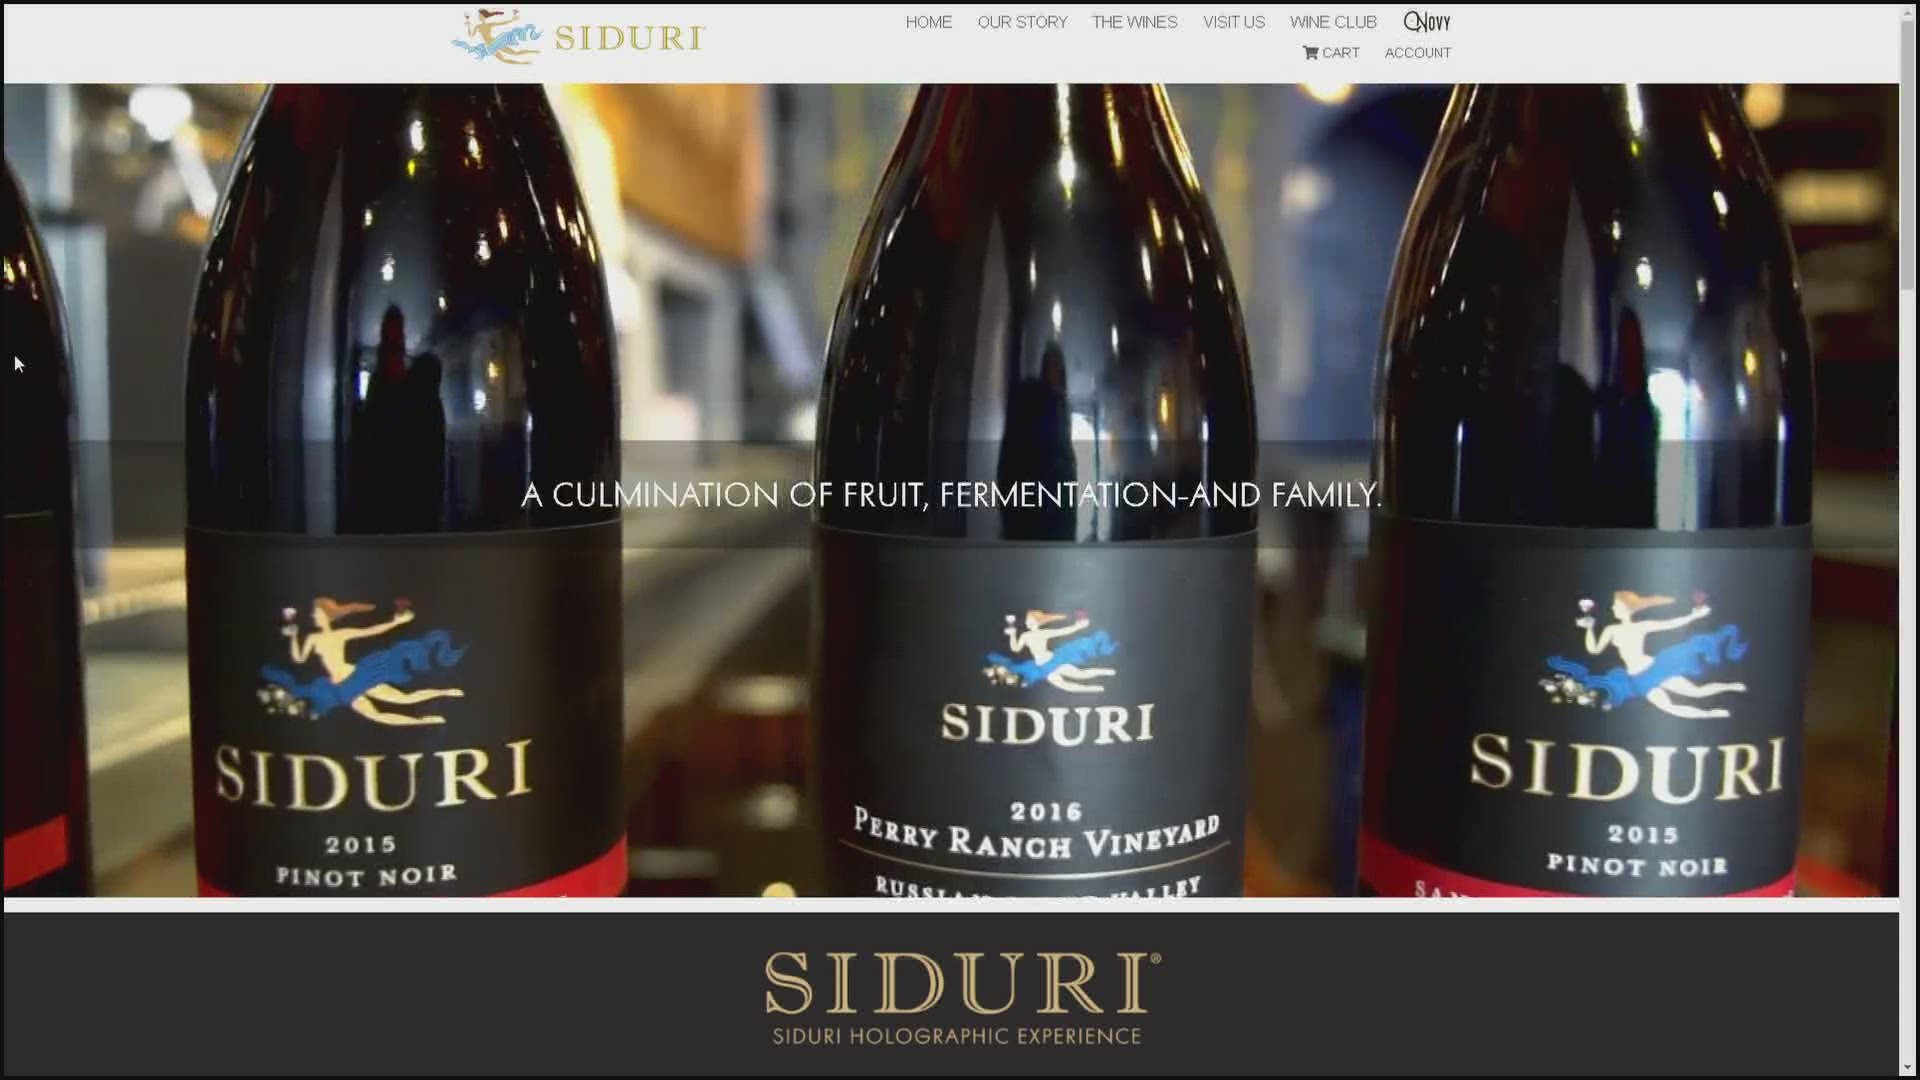 The Siduri Holographic Experience gives consumers a sense of Siduri's personality and what their wines are all about without having to leave the comforts of home.